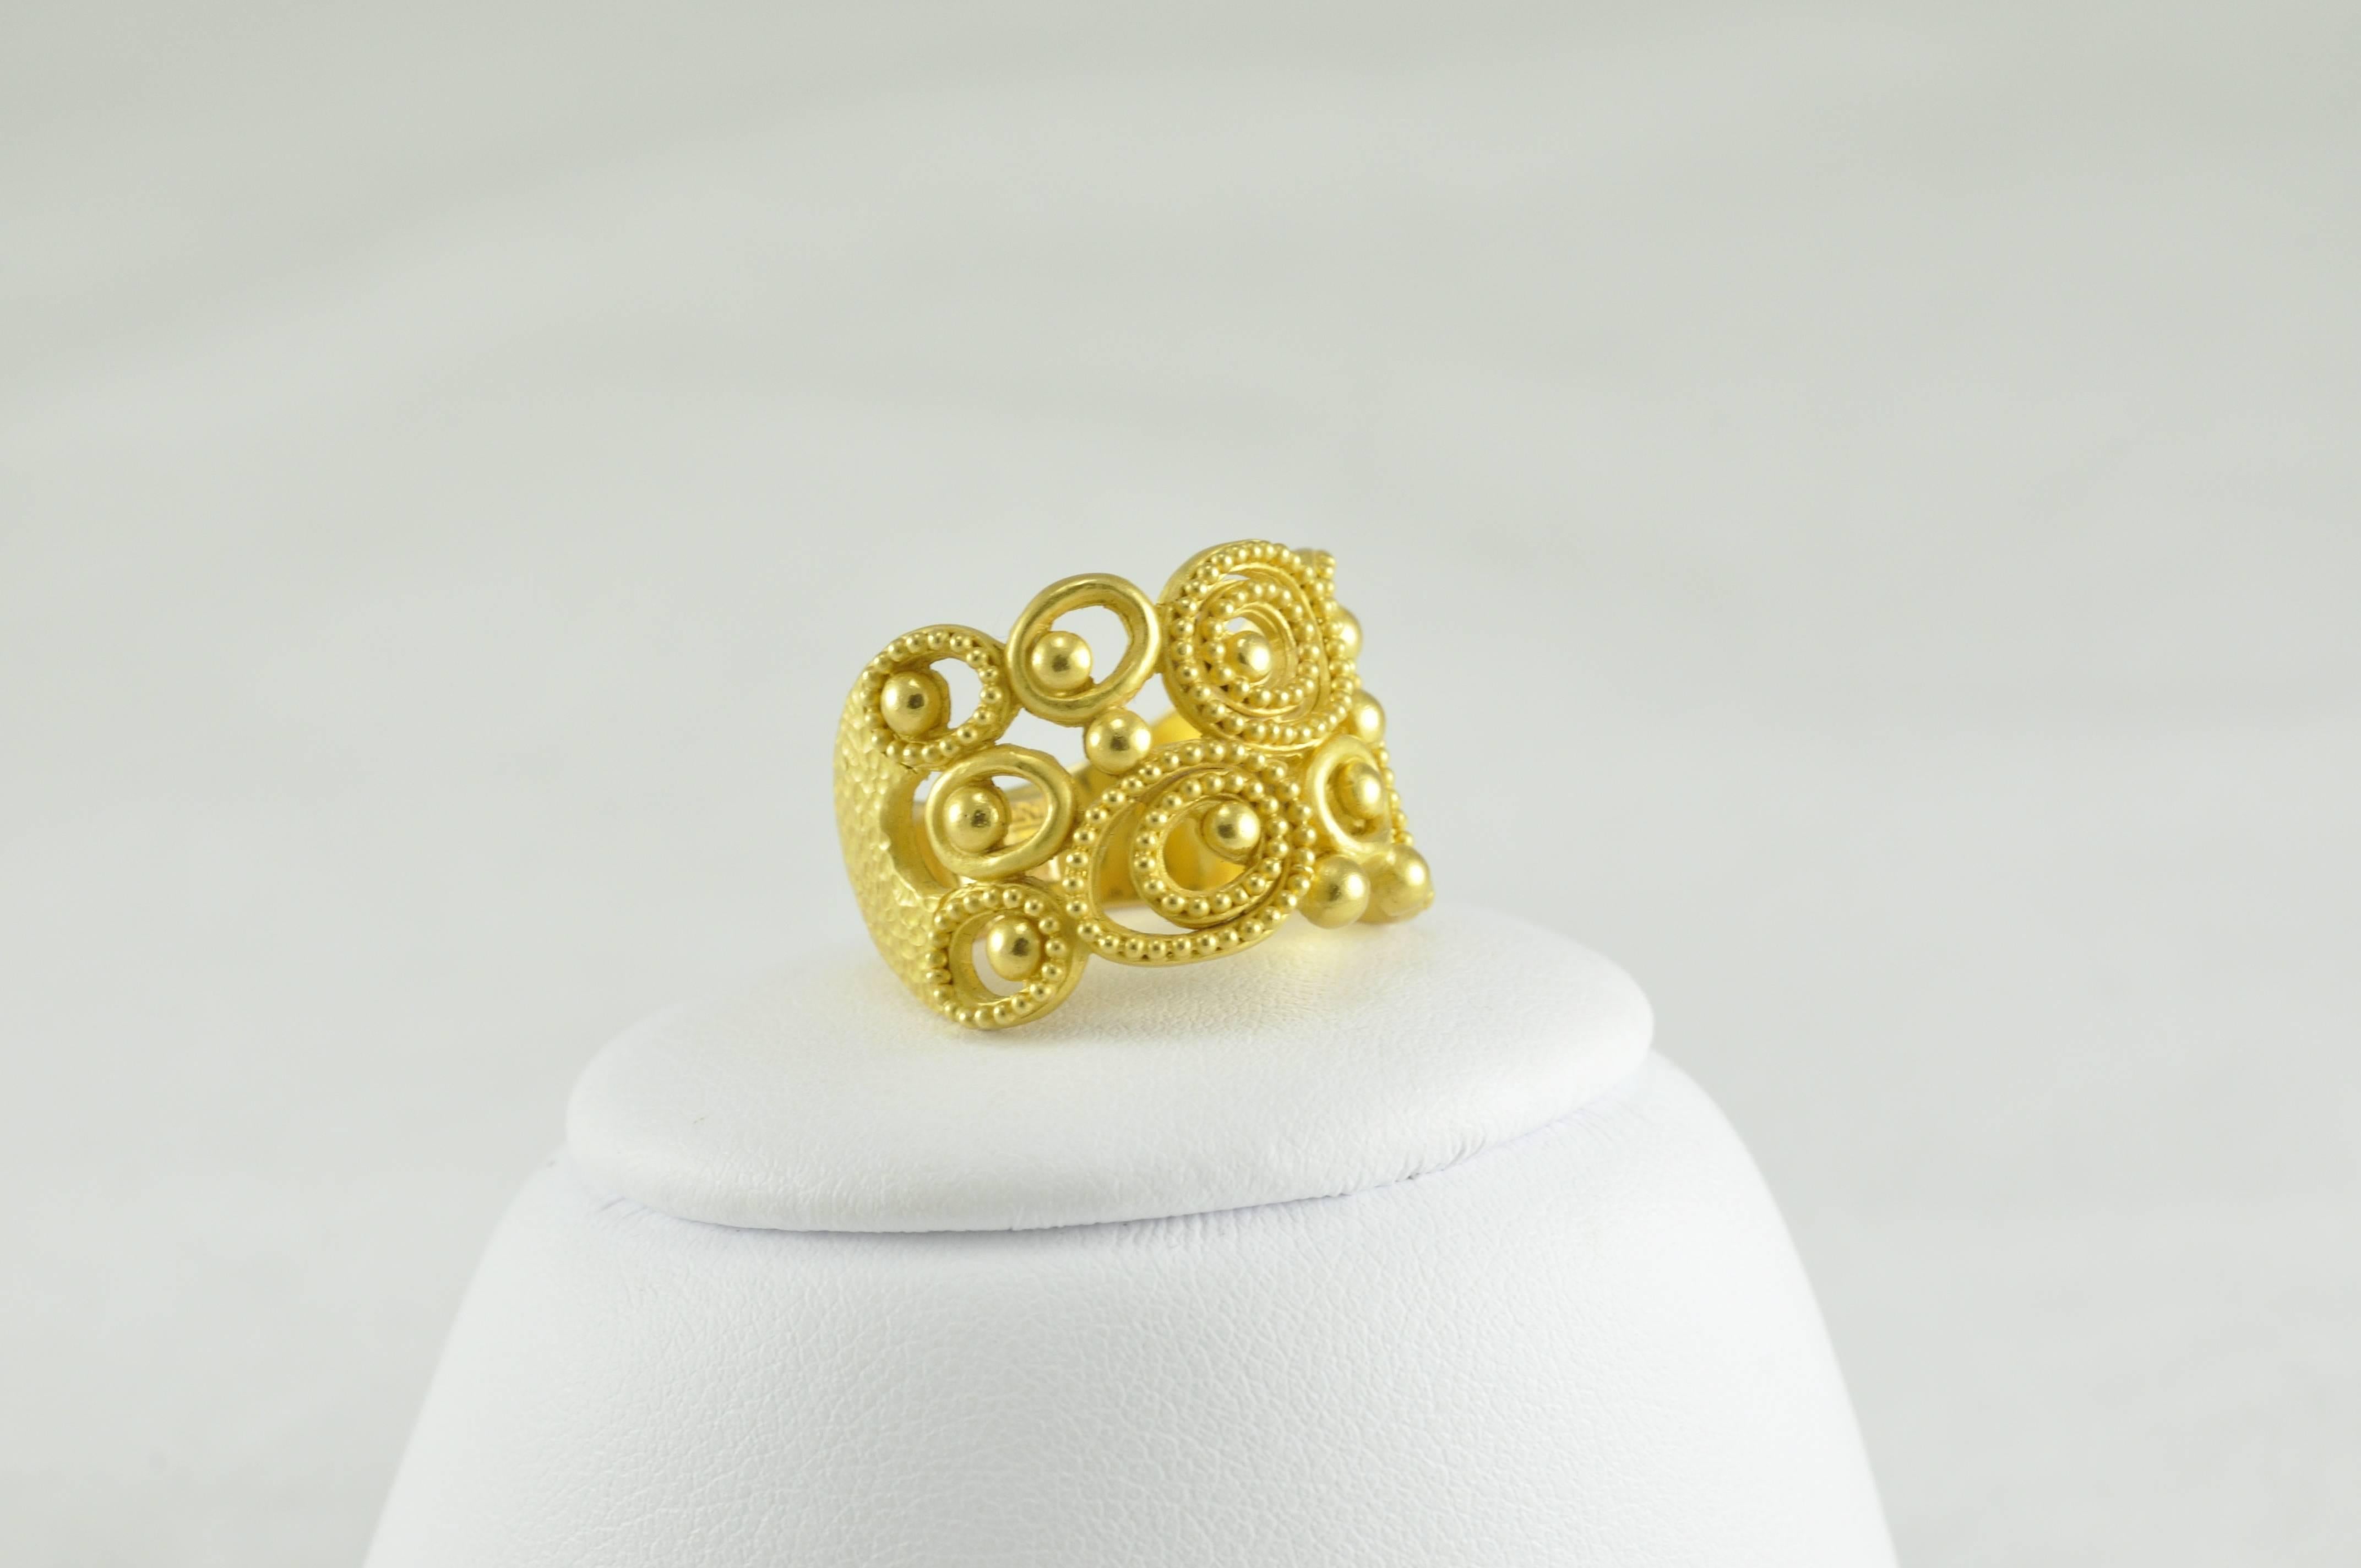 Carolyn Tyler Dune Gold Ring. 
Crafted in 22k Granulated Gold. 
Currently sized 7.5.  Addiitonal Sizes may be available upon request.  This ring cannot be sized but can be ordered in your size and takes approximately six weeks to fulfill the order.  